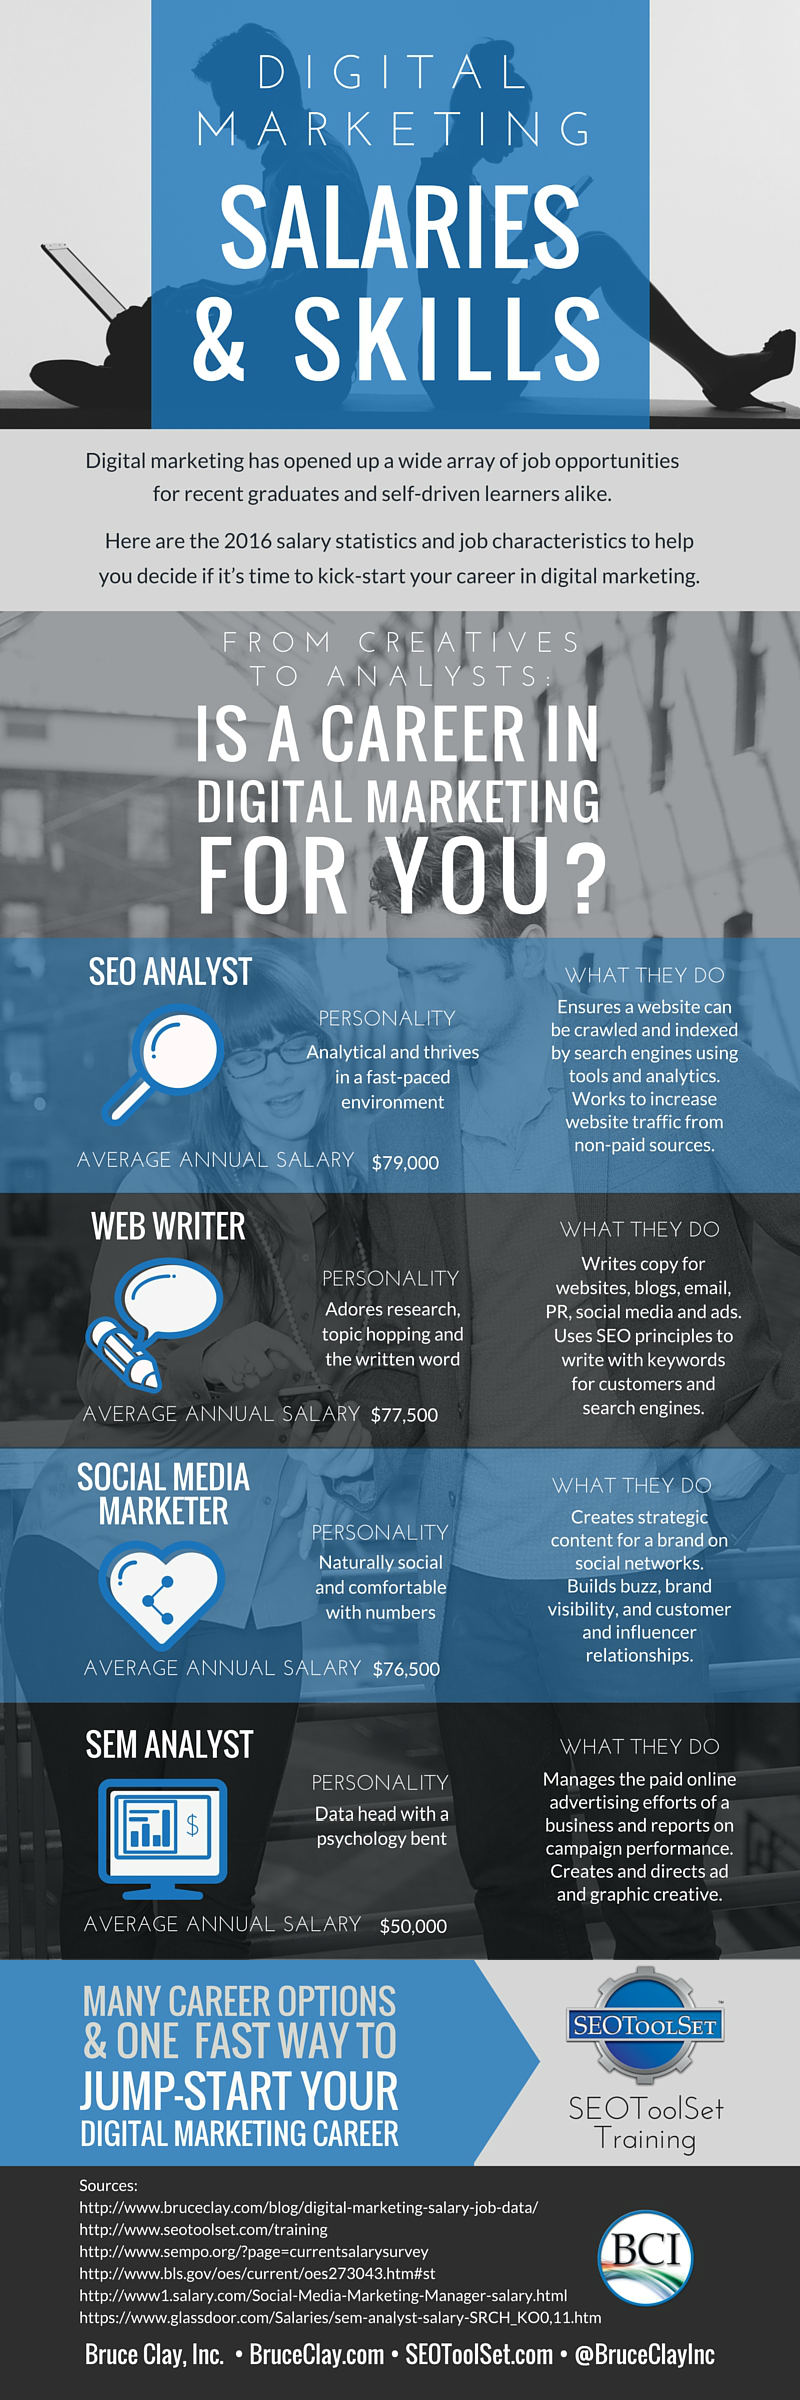 digital marketing jobs and salary infographic